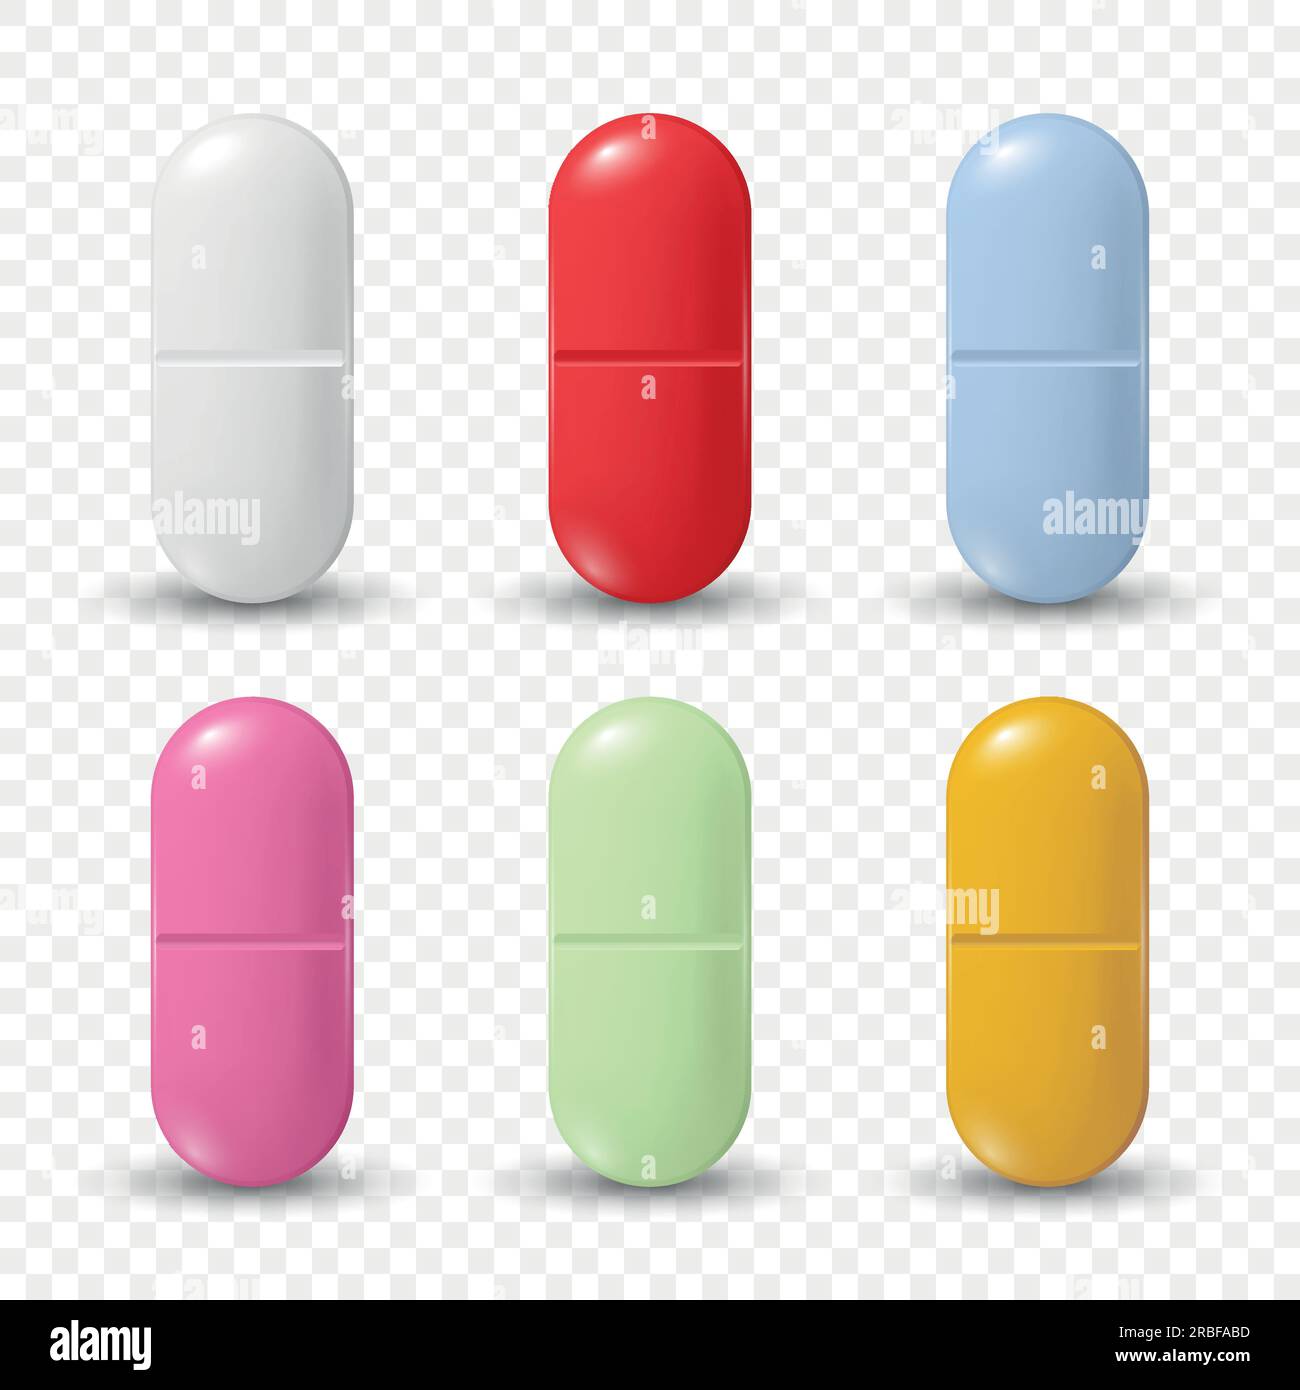 Vector Realistic Oval Pharmaceutical Medical Pills, Tablets, Vitamins, Capsule Set Closeup Isolated. Pills Design Template, Collection. Front View Stock Vector